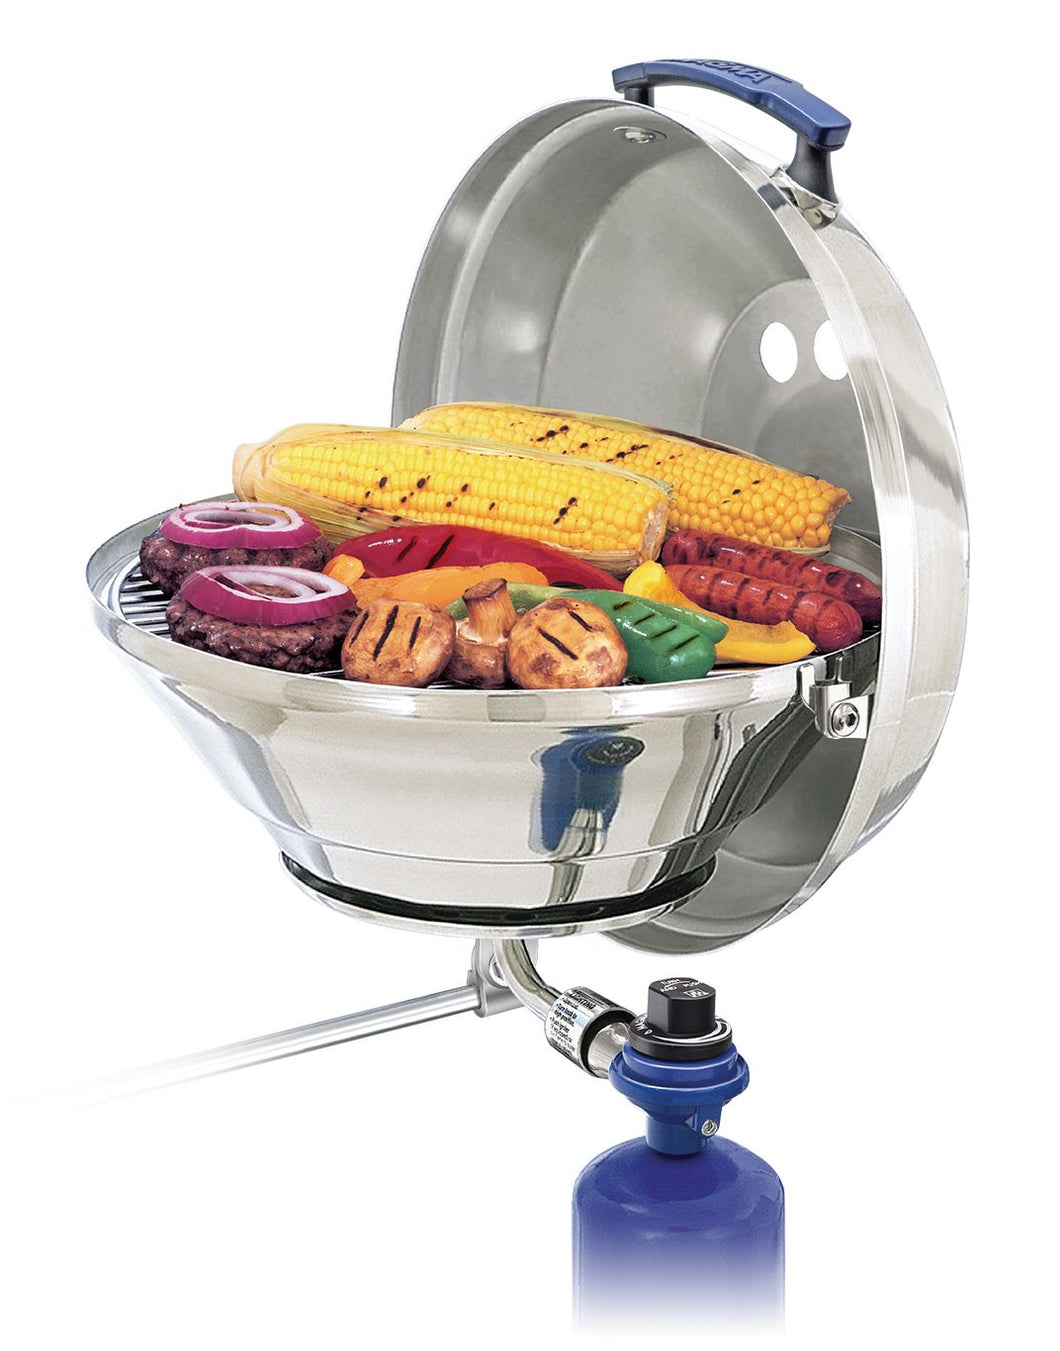 Original Marine Kettle grill rail mounted with grilled hamburgers, saugsages and vegetables